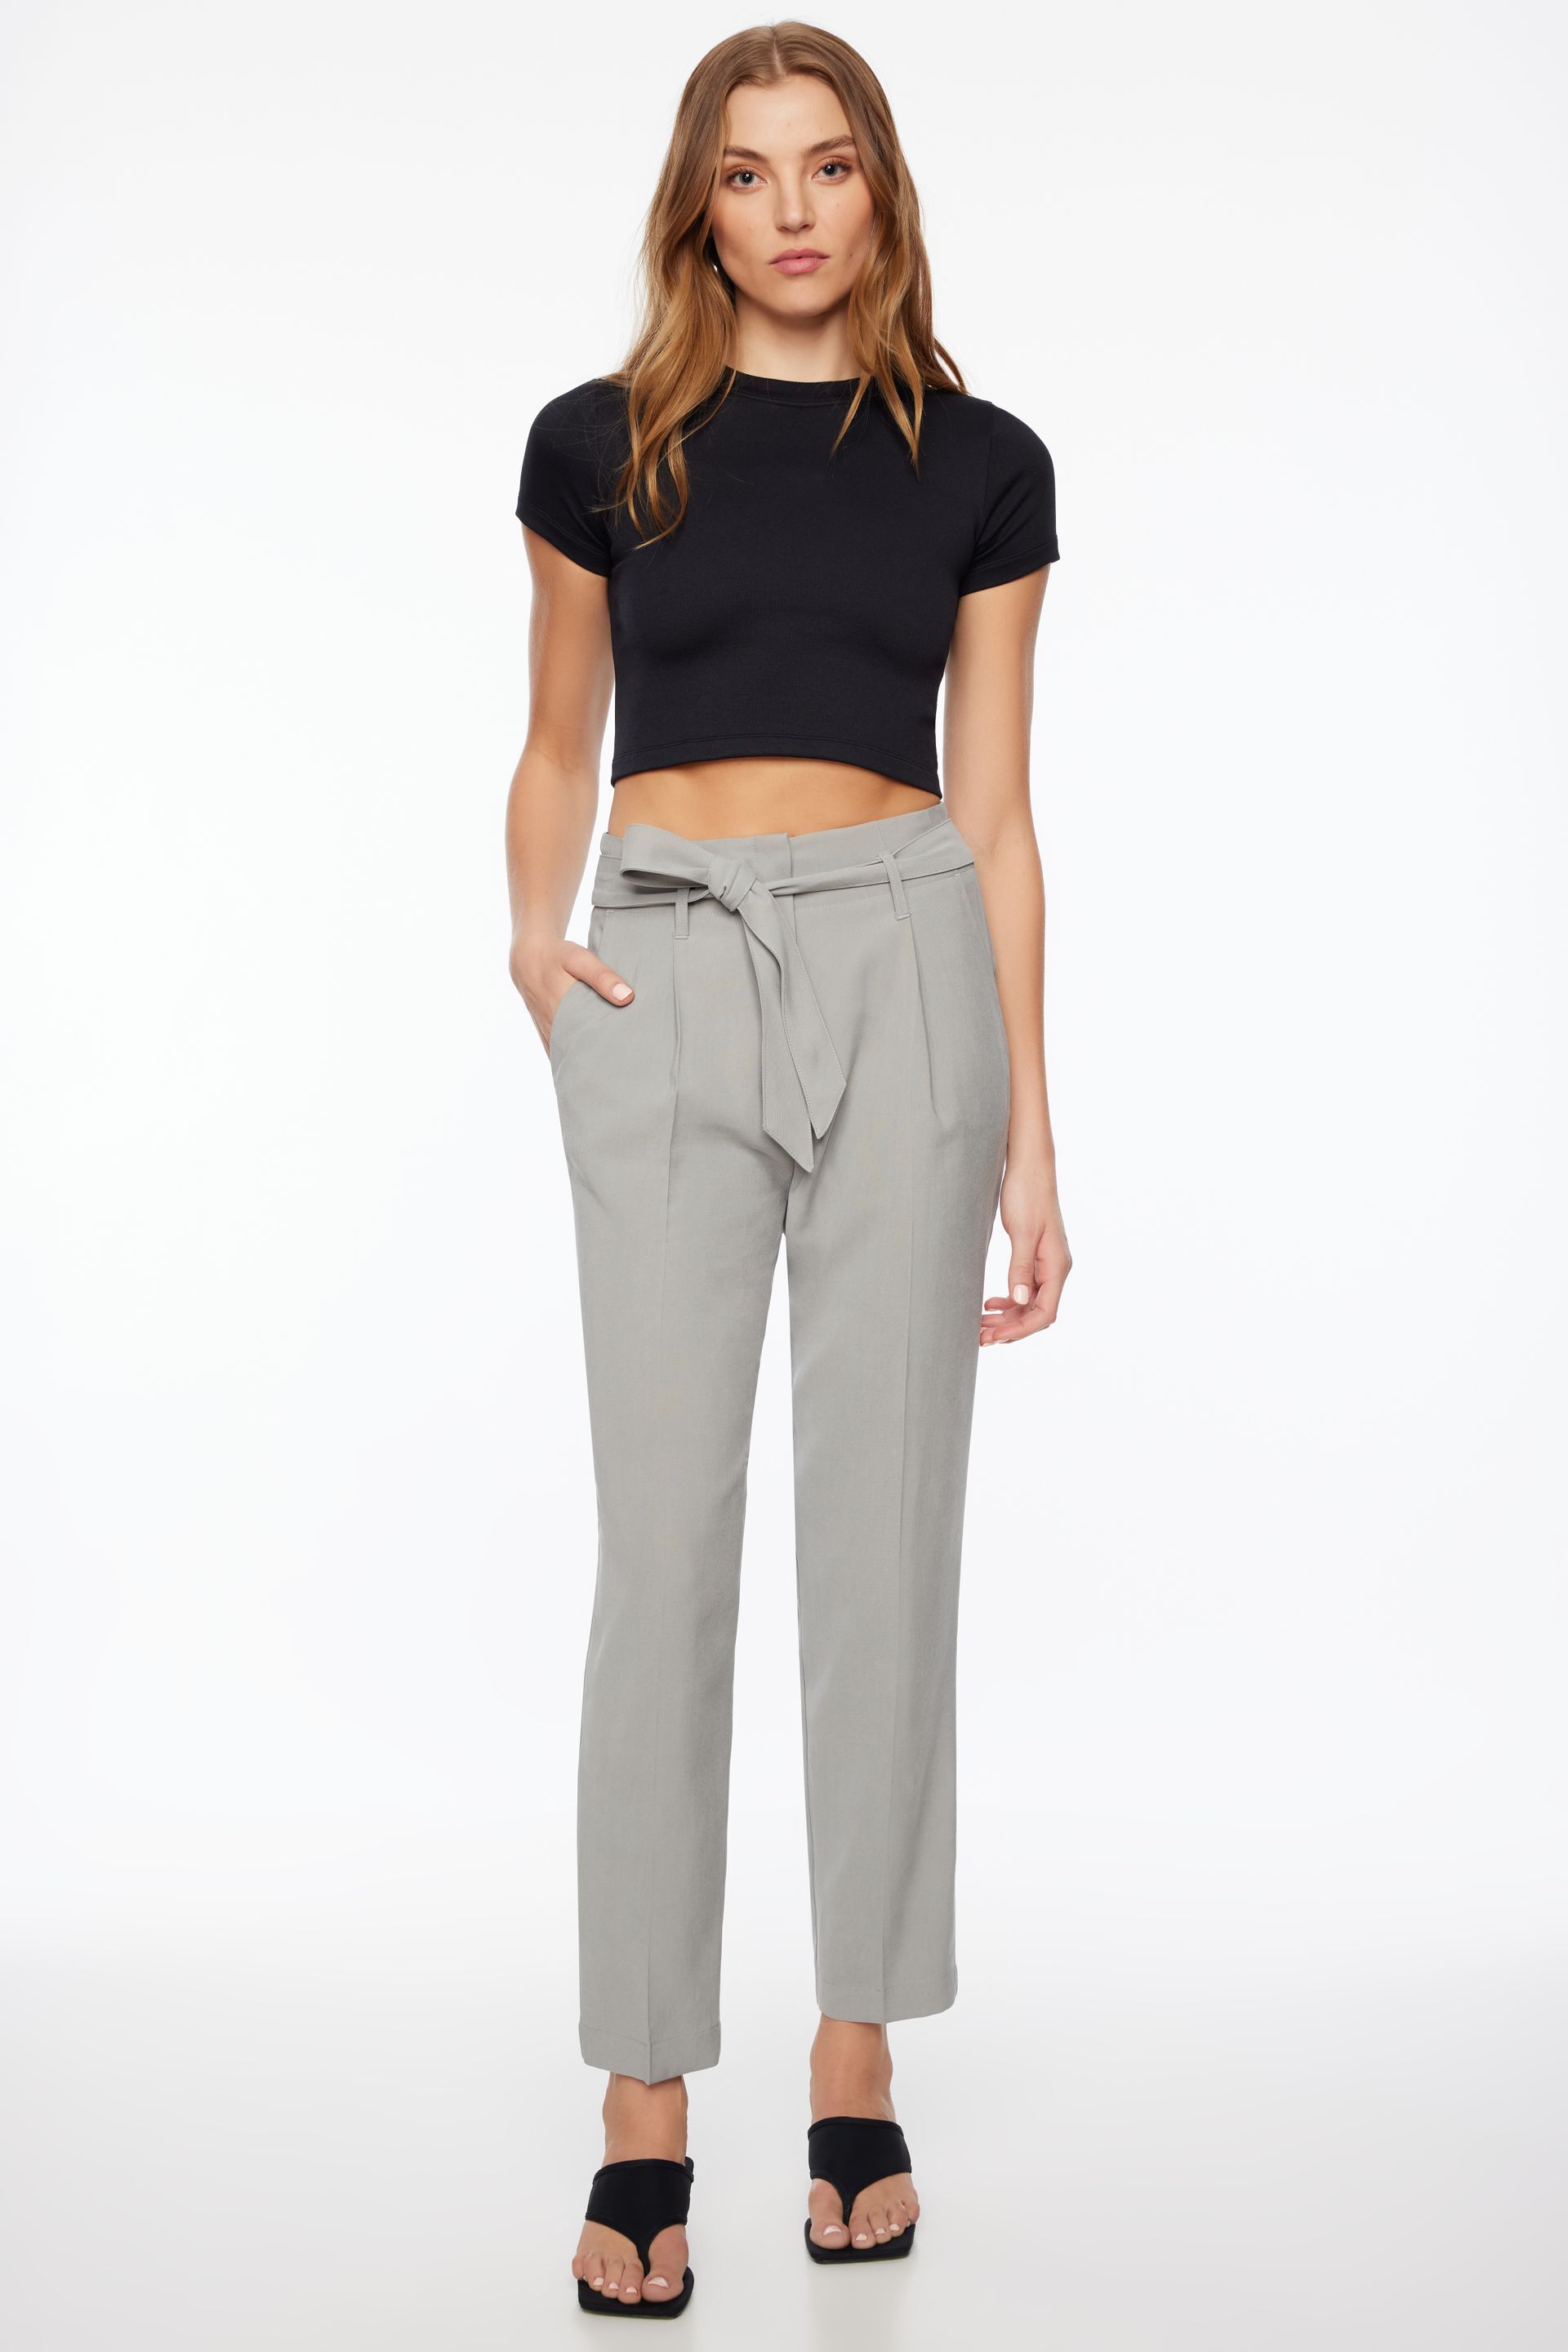 Womens Trousers  Explore our New Arrivals  ZARA India